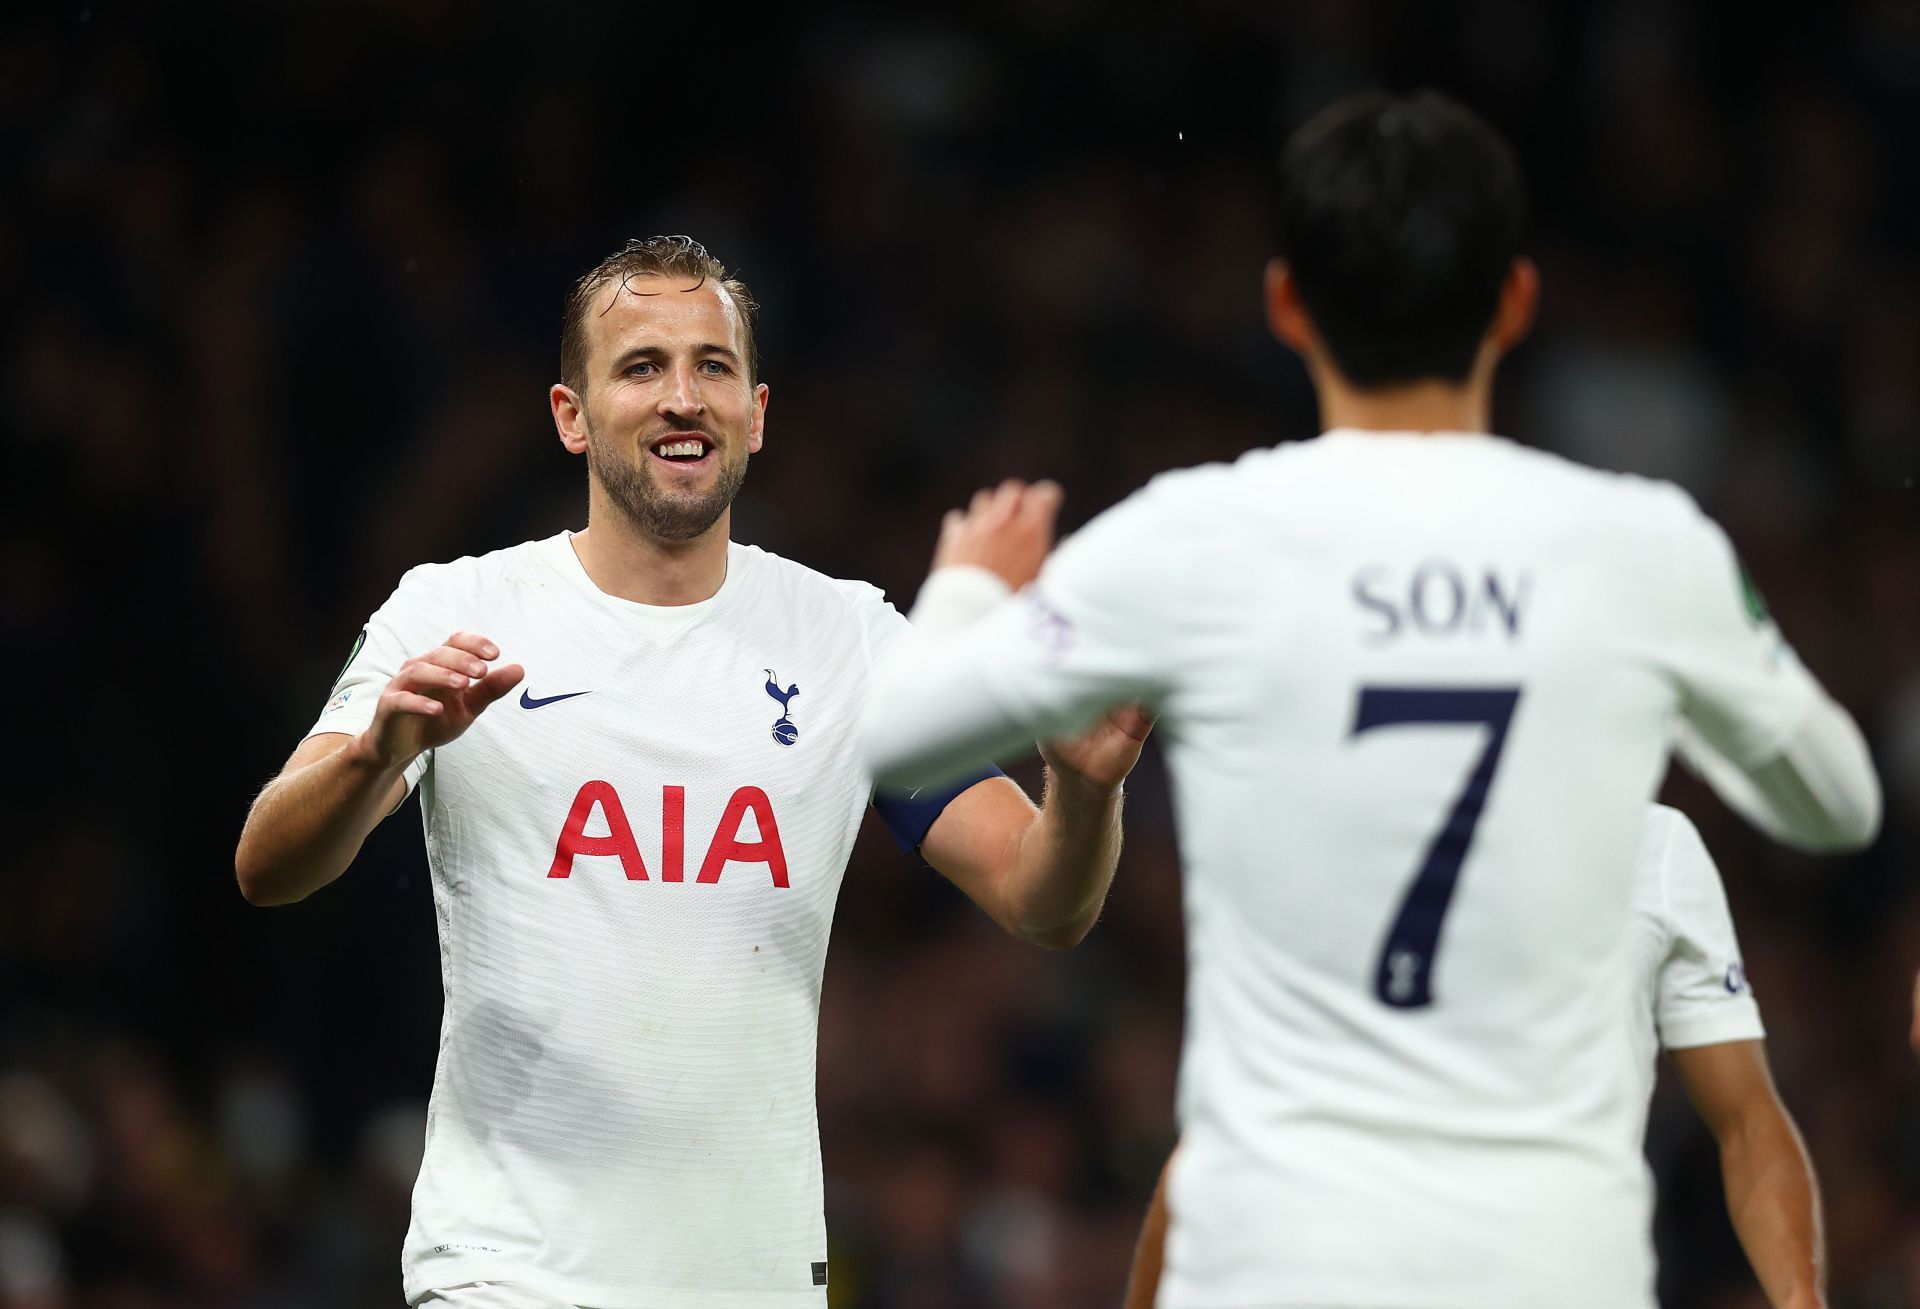 Harry Kane (L) and Heung-min Son (#7) are back at their best under Antonio Conte